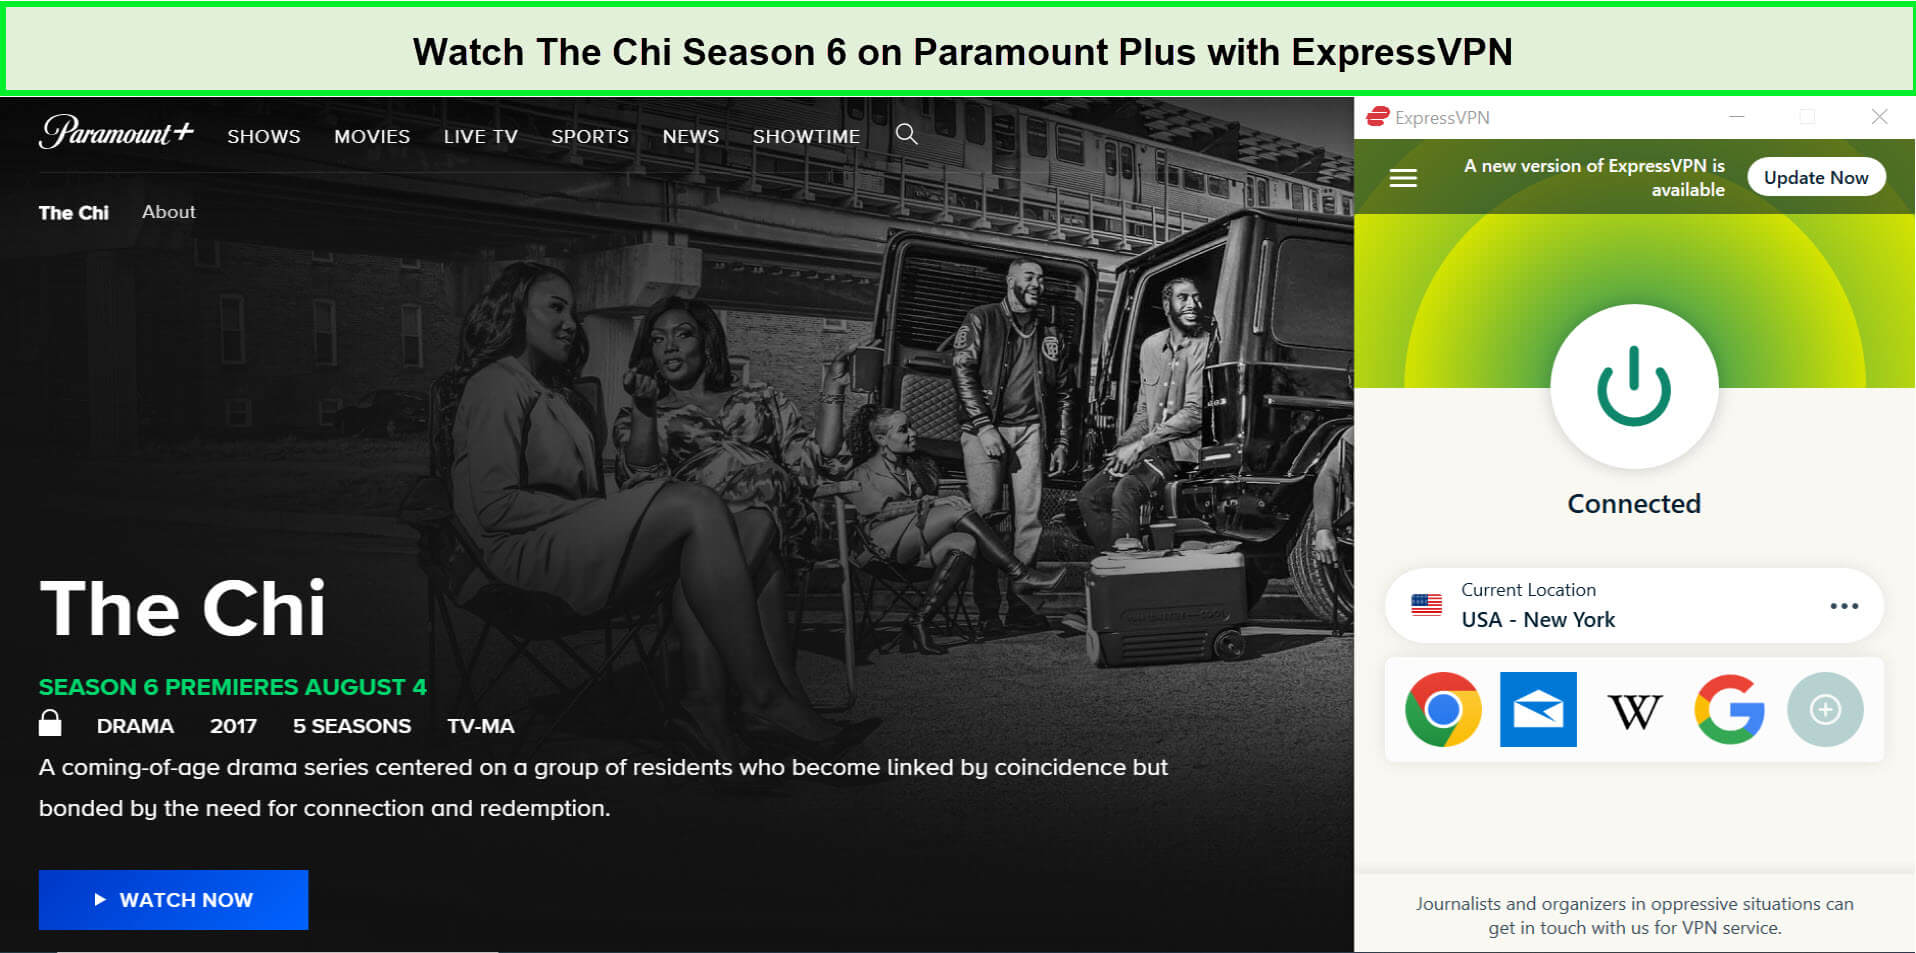 Watch-The-Chi-Season-6-in-Japan-on-Paramount-Plus-with-ExpressVPN